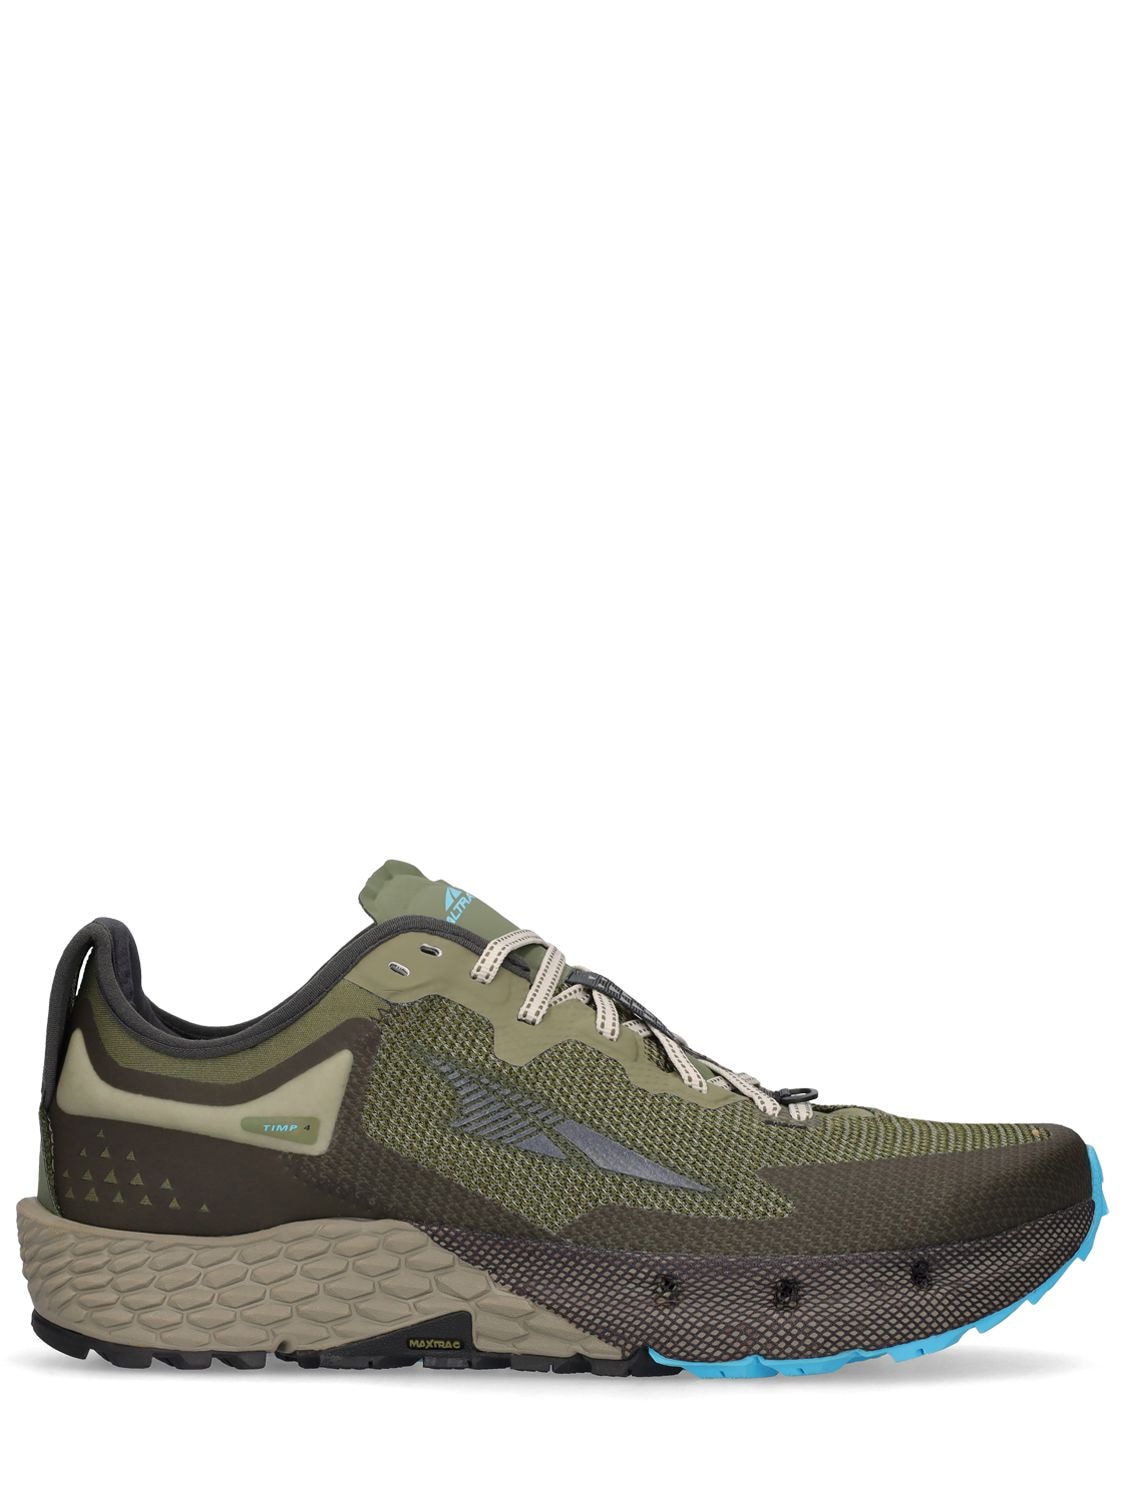 Altra Running Timp 4 Trail Running Sneakers In Dusty Olive | ModeSens